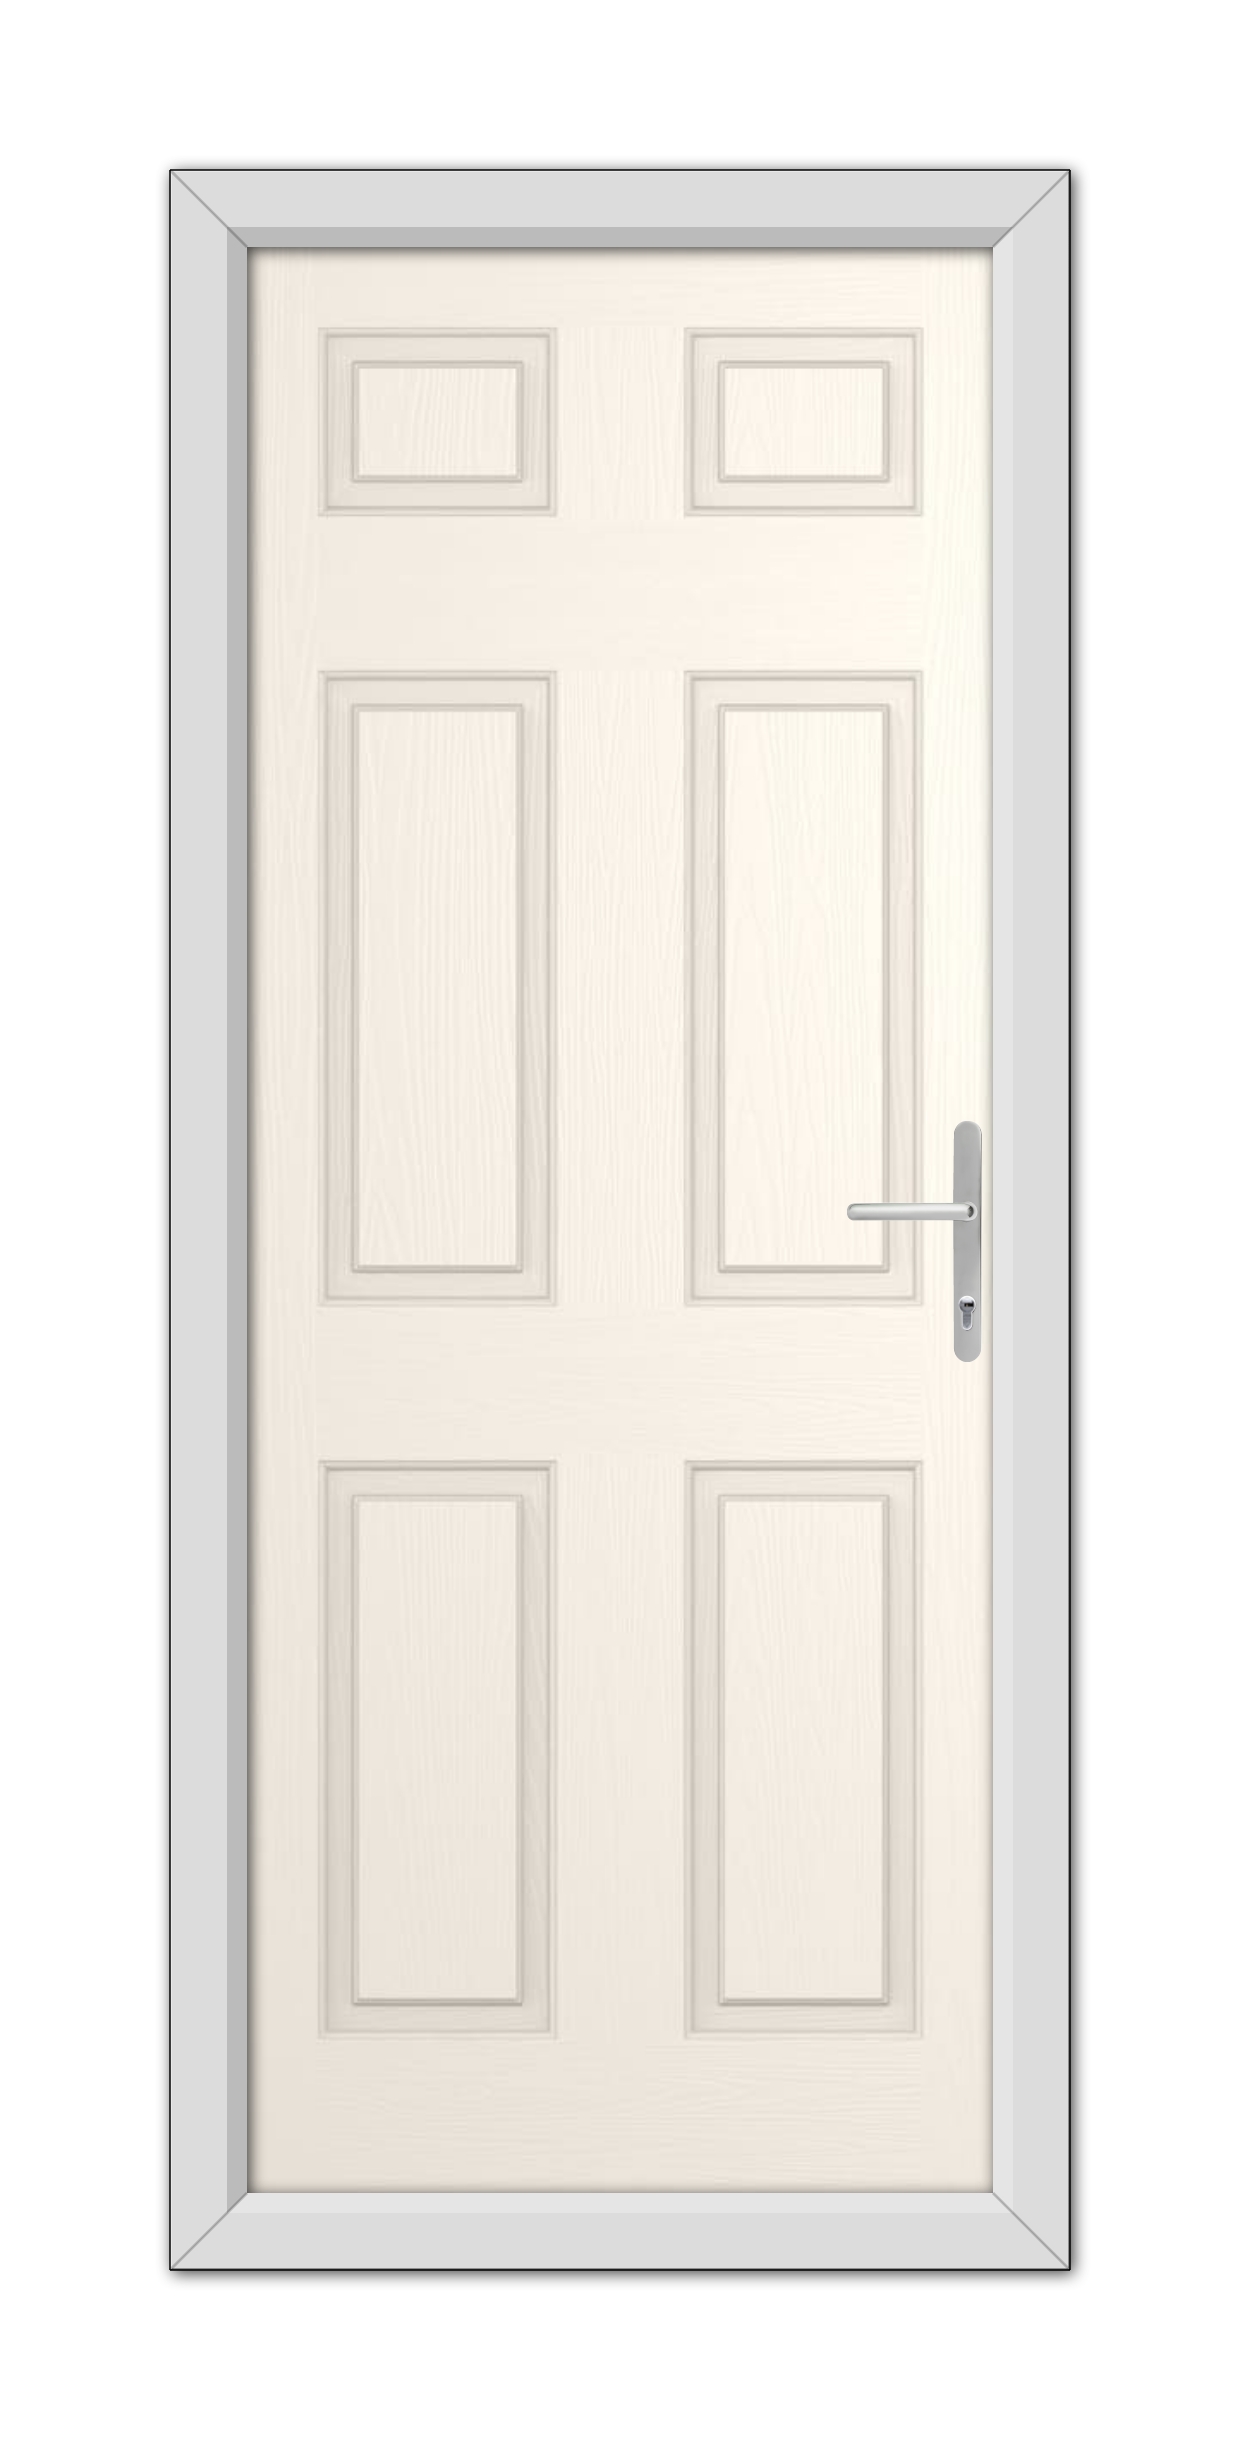 A White Foil Middleton Solid Composite Door 48mm Timber Core with a metal handle, set within a simple frame, viewed frontally against a white background.